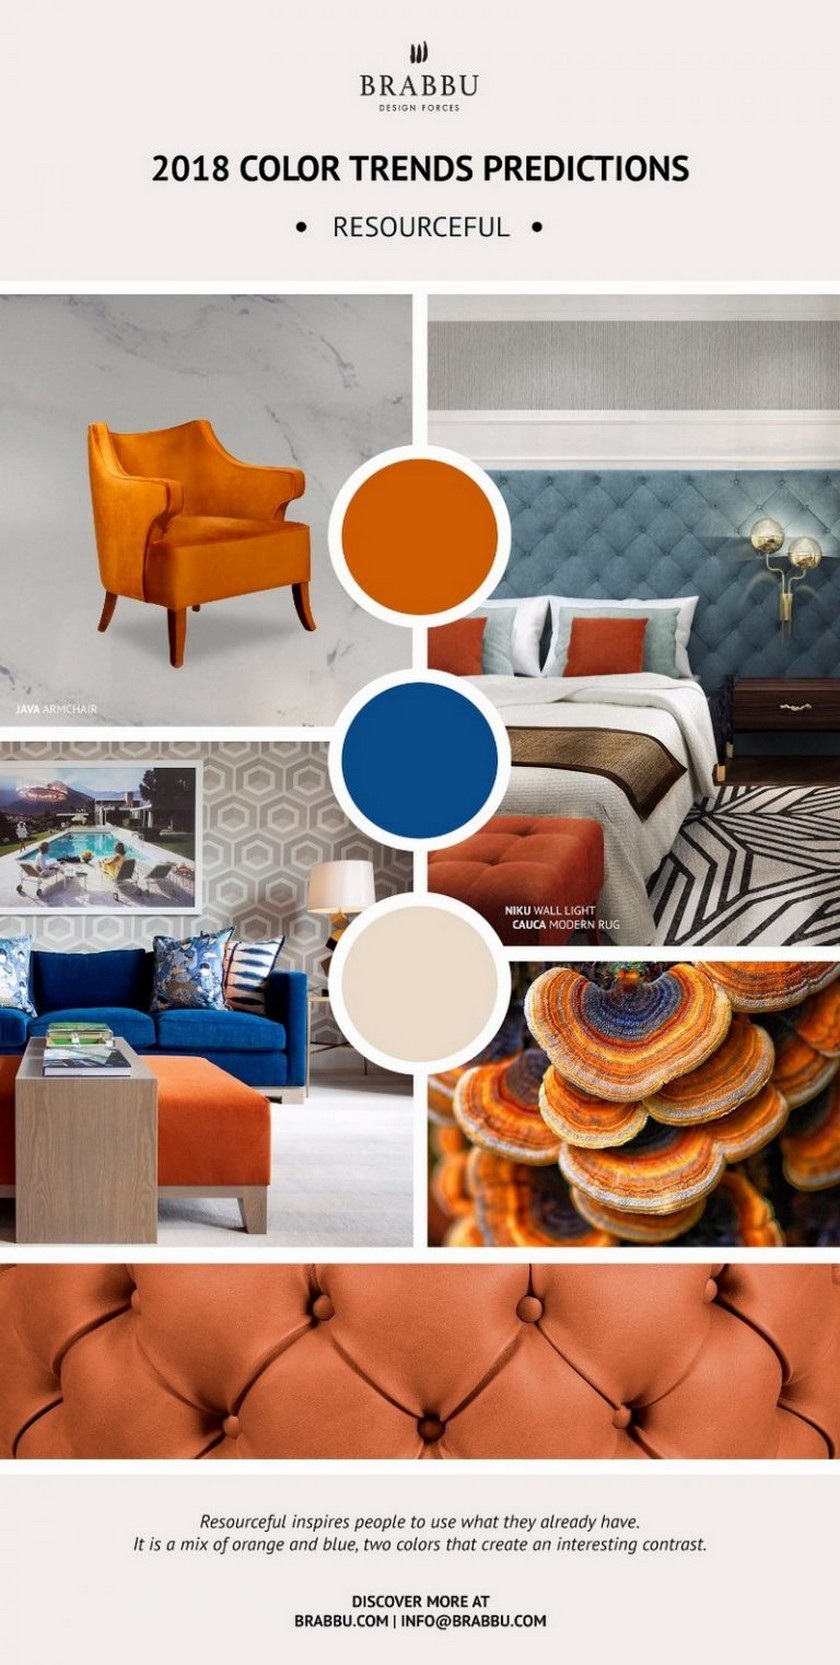 Explore Now the Pantone's Color Trend Predictions for 2018 ➤ Discover the season's newest design news and inspiration ideas. Visit Daily Design News and subscribe our newsletter! #dailydesignnews #designnews #interiordesign #pantone #pantone2018 #colorscheme #colorschemeideas